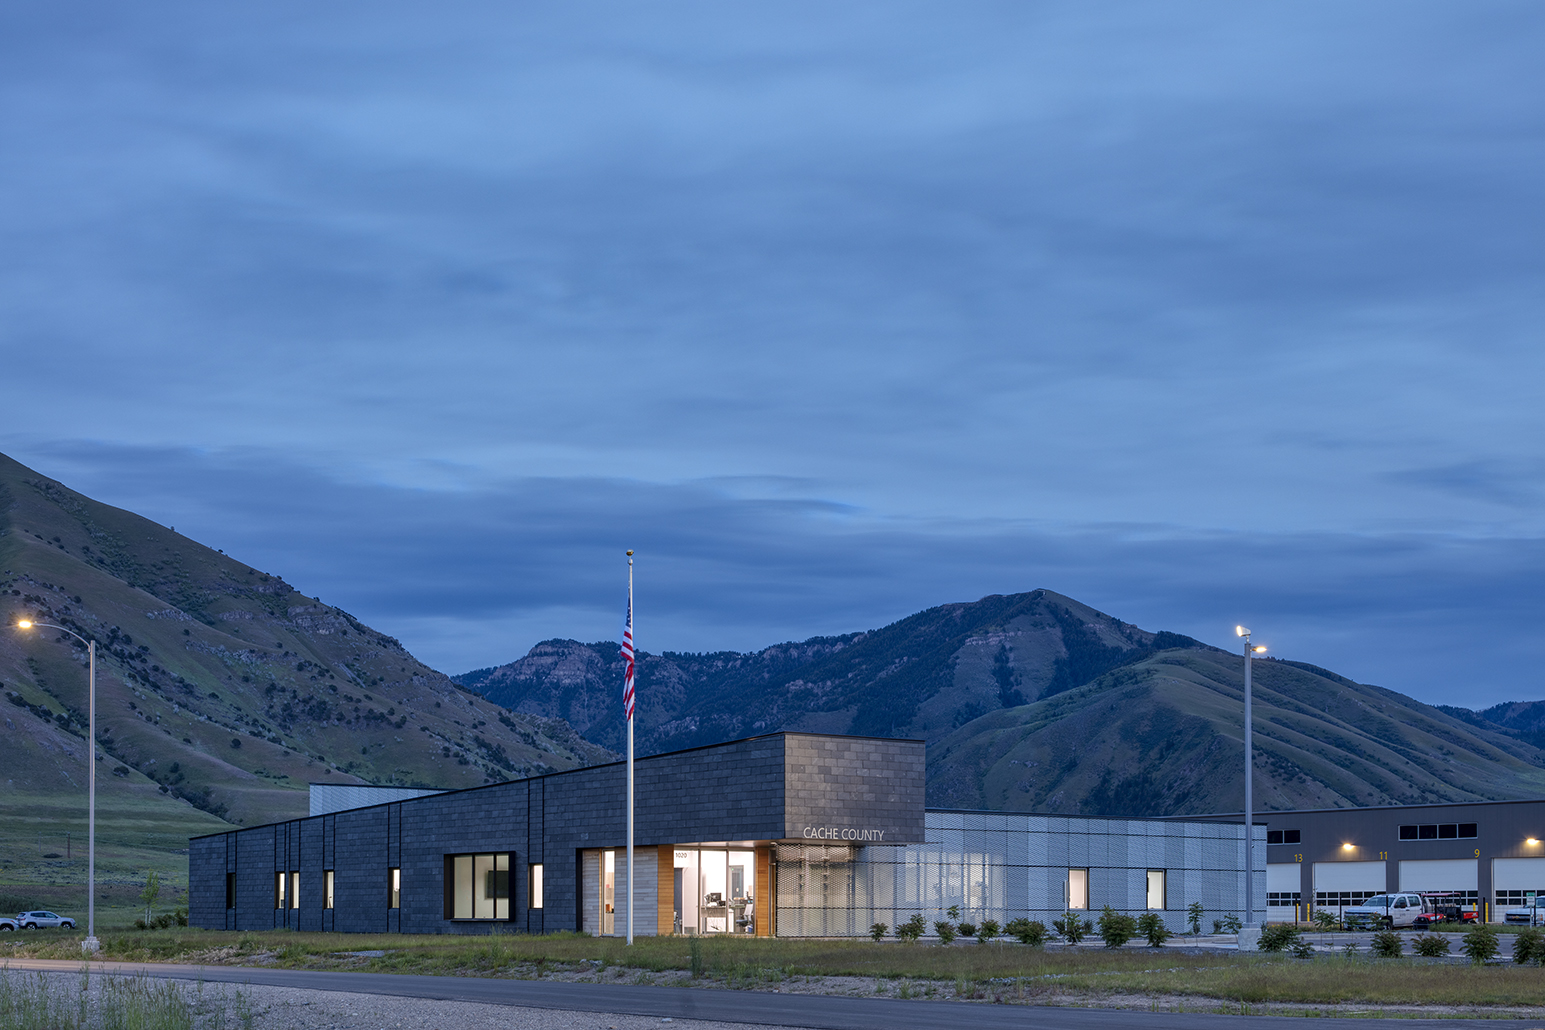 Exterior view of the Cache County Public Works Facility nestled up against the mountains in Hyrum, UT. The building is a metal and slate clad structure that is low in profile and modern looking and the picture was captured at dusk with the interior lights on.